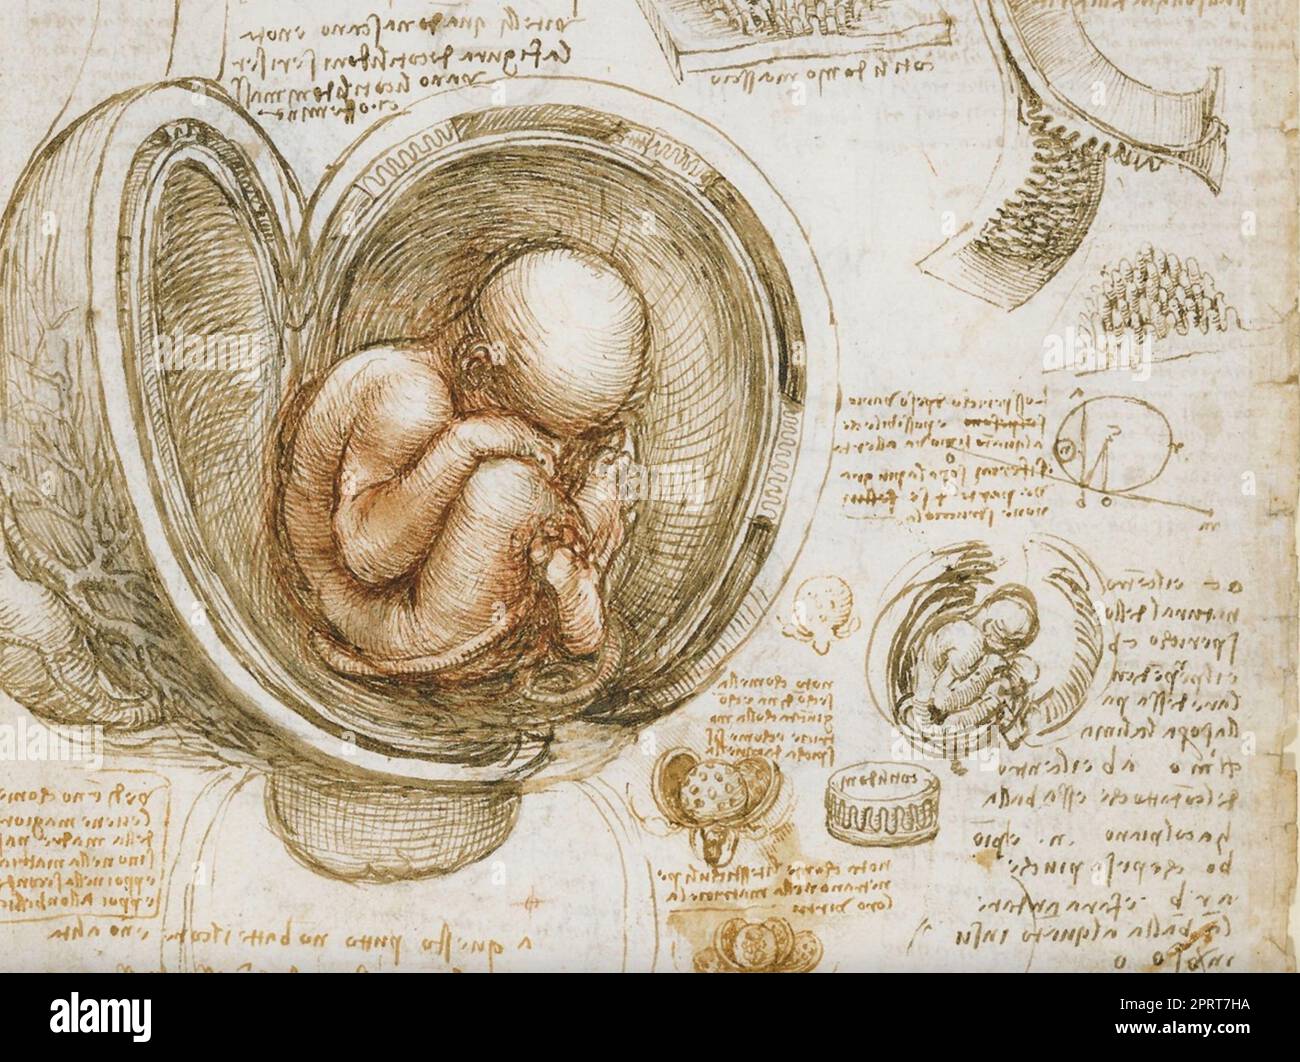 LEONARDO da VINCI (1452-1519) Italian polymath.  Section of his drawing of a foetus in the womb about 1510.  Spurce: Royal Library, Windsor Castle. Stock Photo